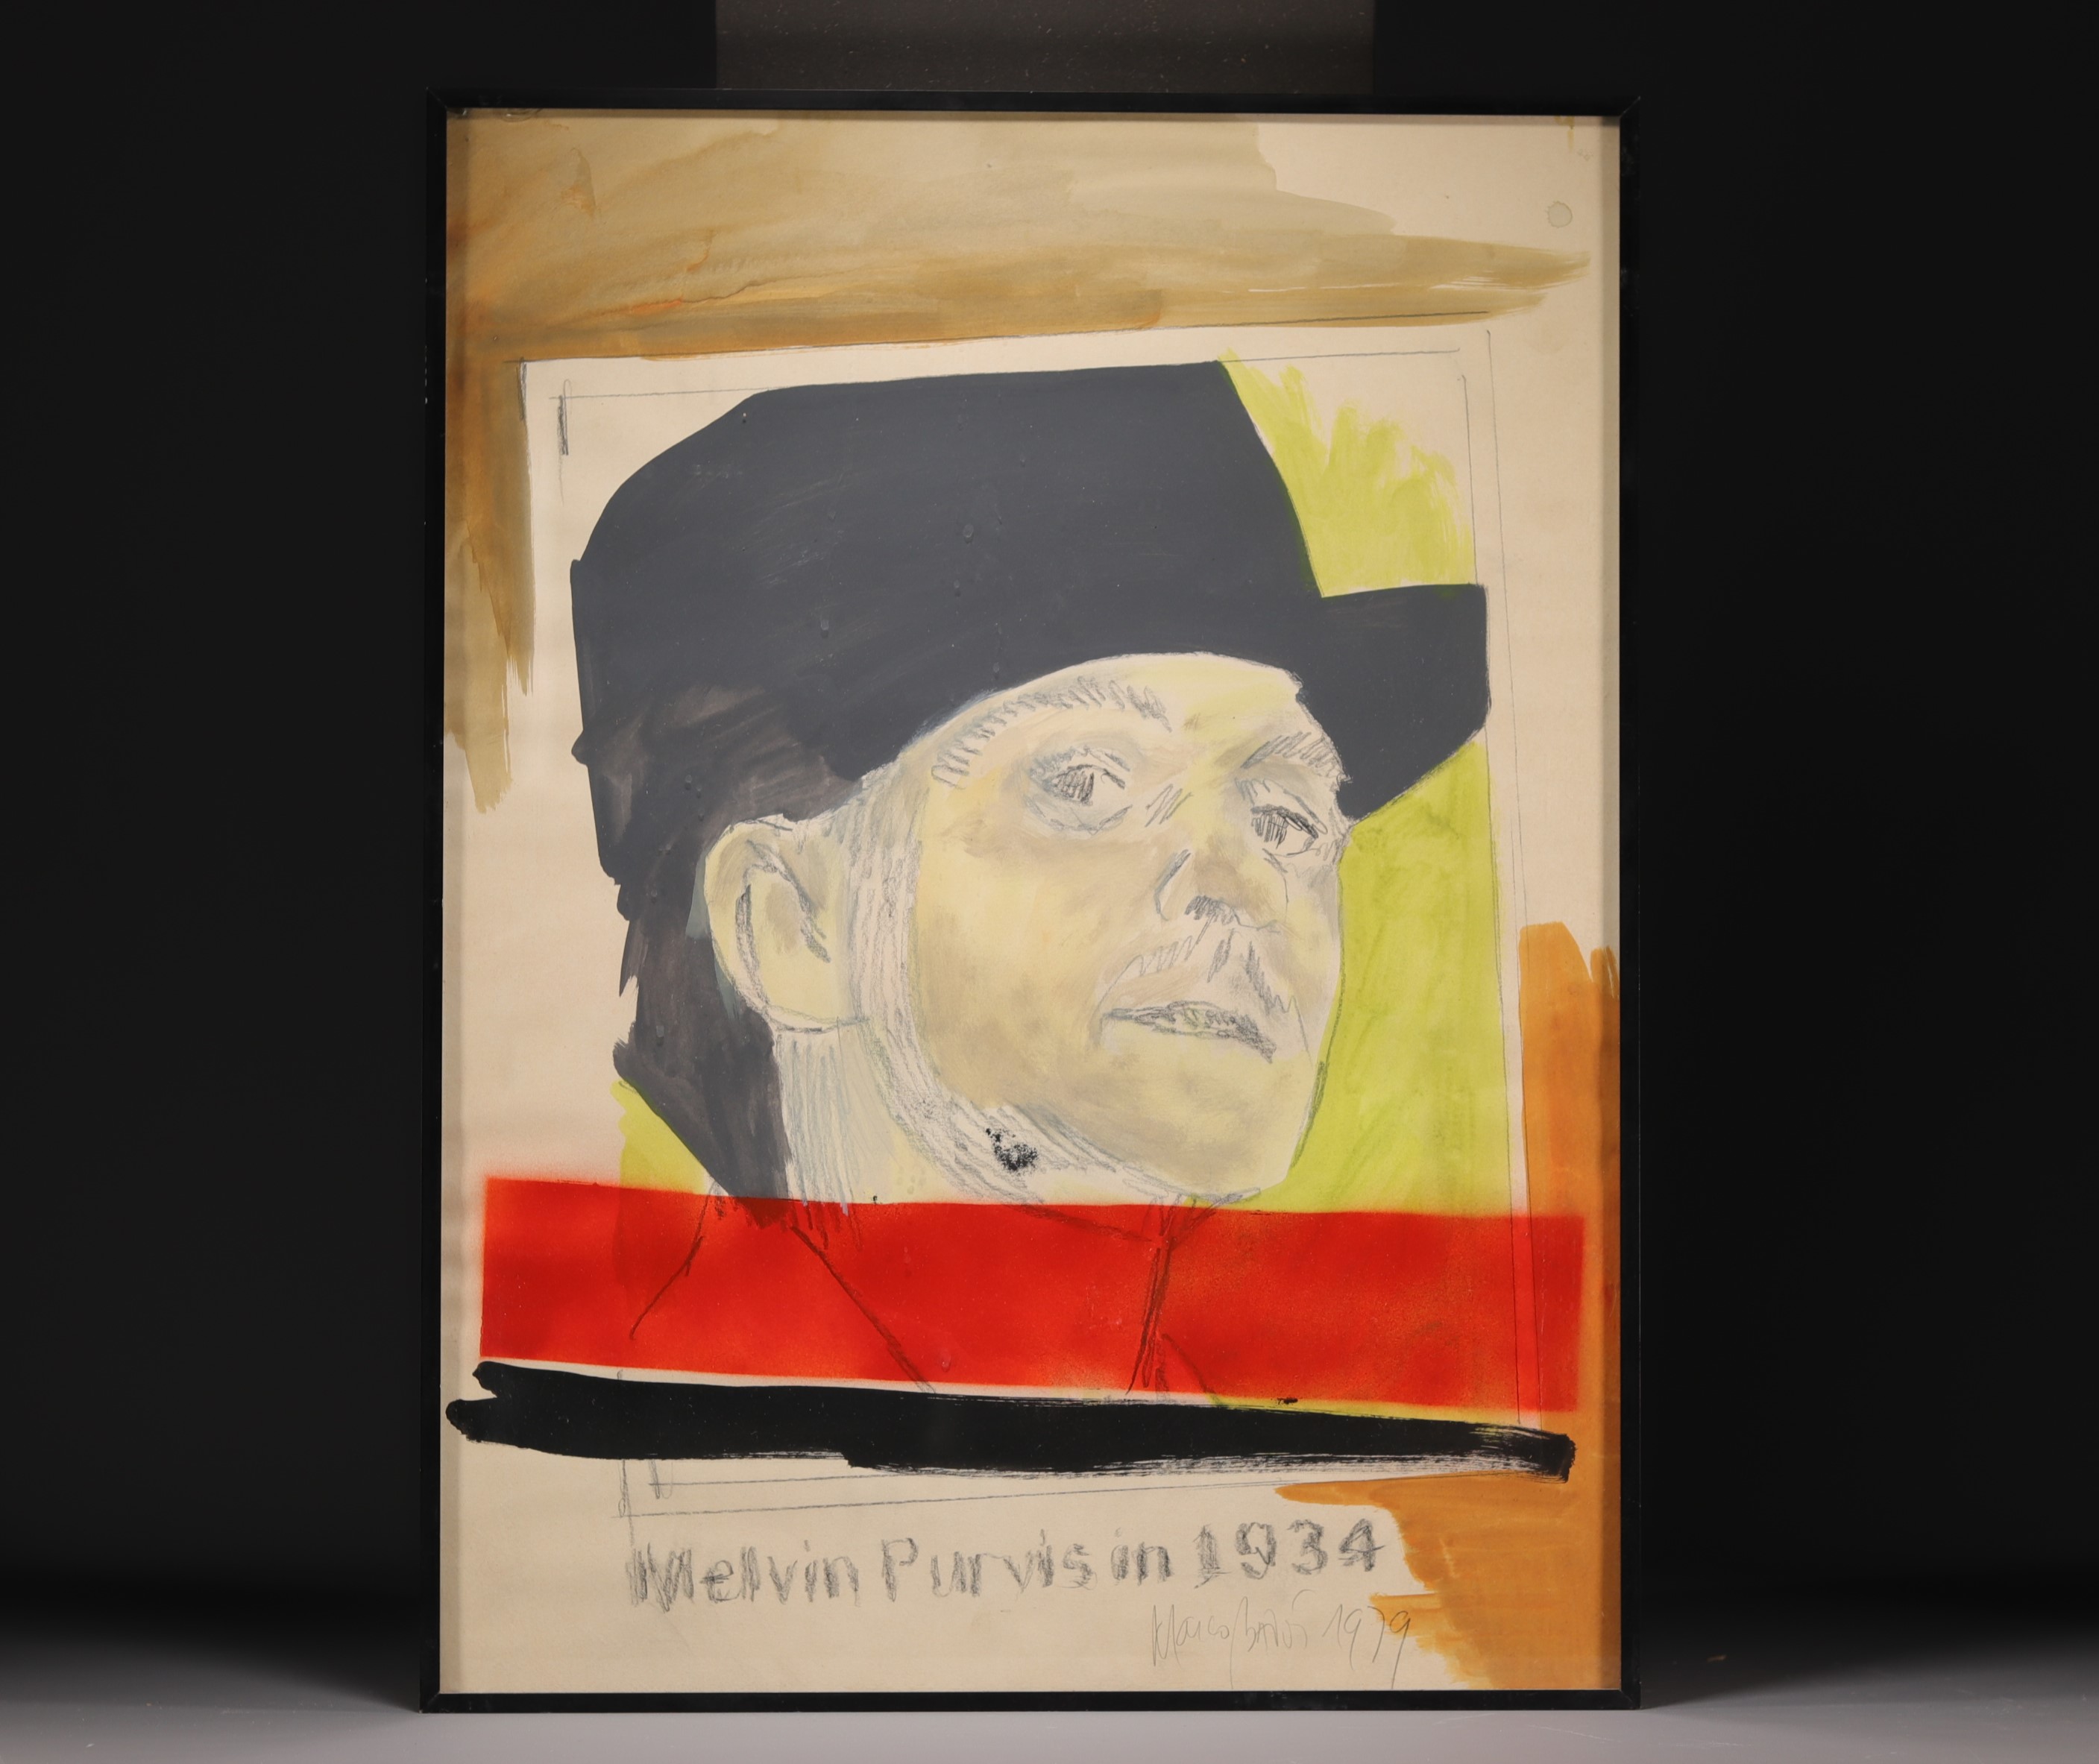 Marco BAVOS ? "Melvin Purvis in 1934" Mixed media on paper, 1979. - Image 2 of 2